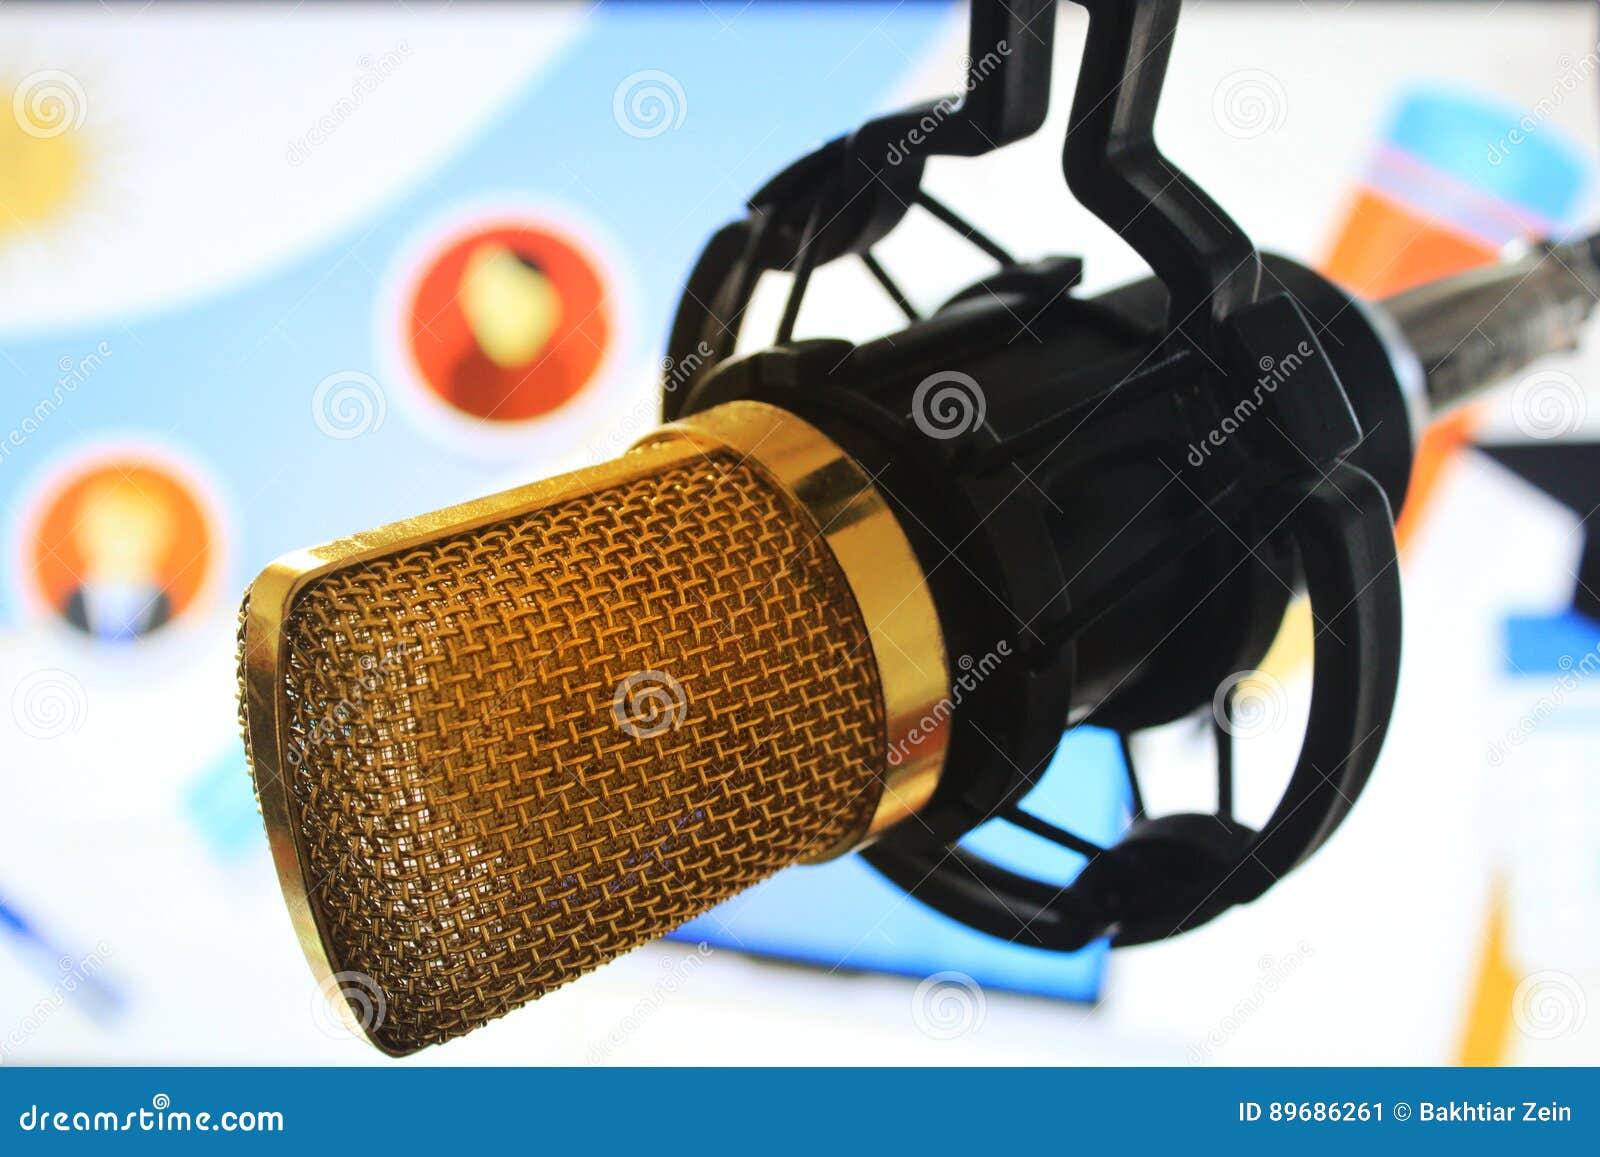 public relations pr microphone for news global map world press people talking